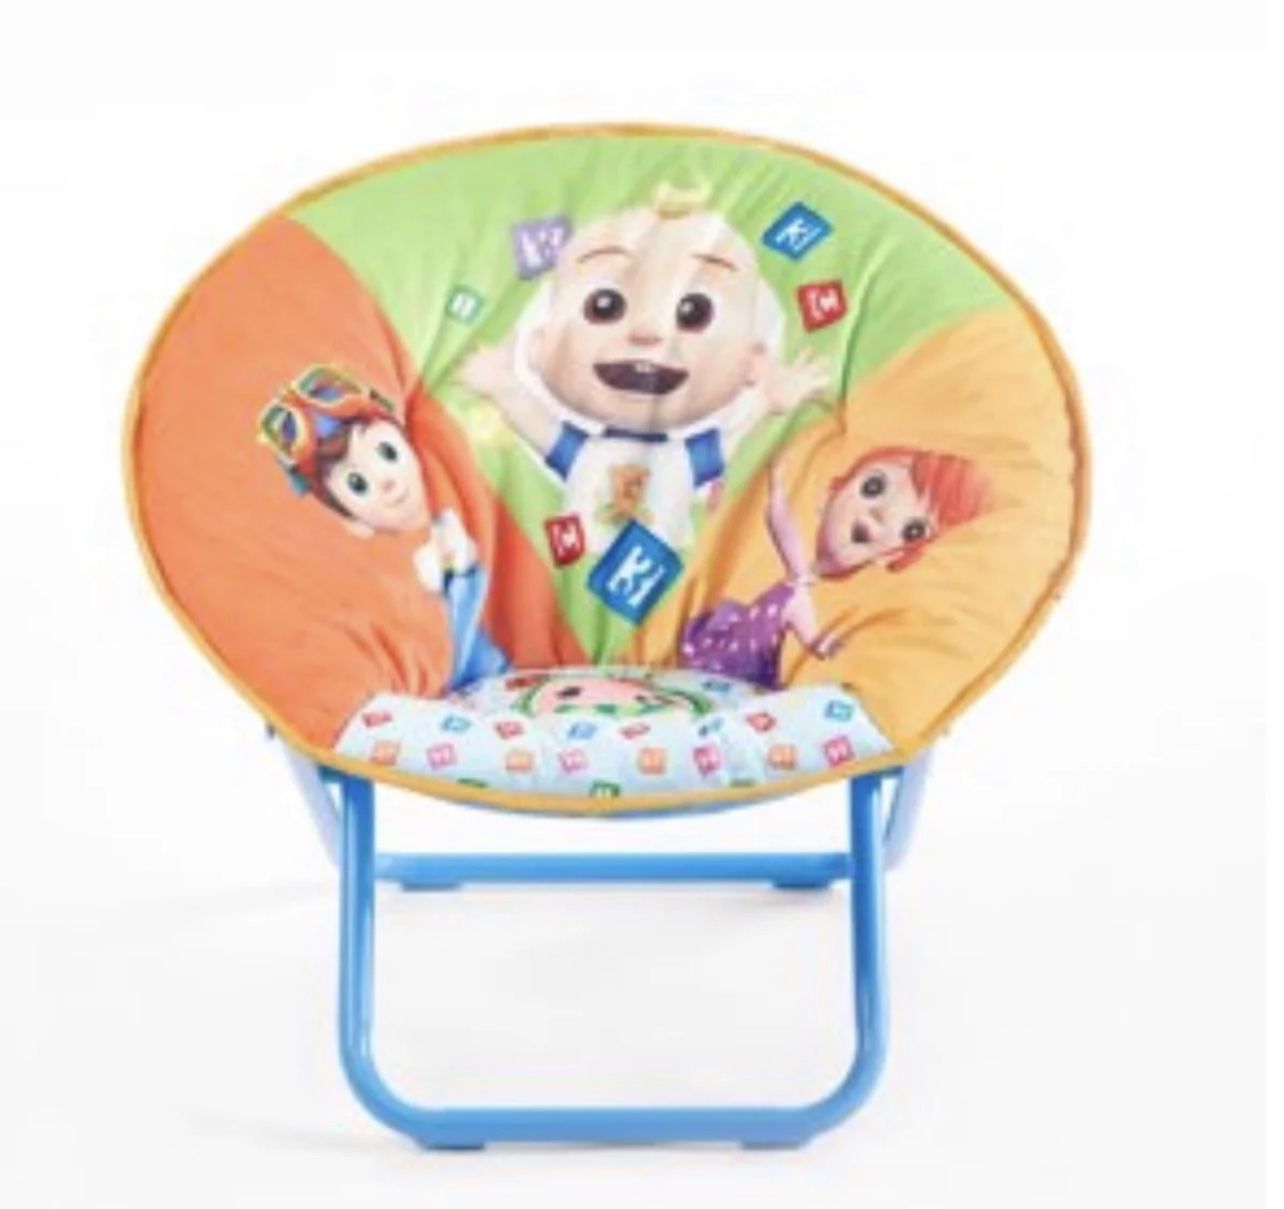 Cocomelon Saucer chair